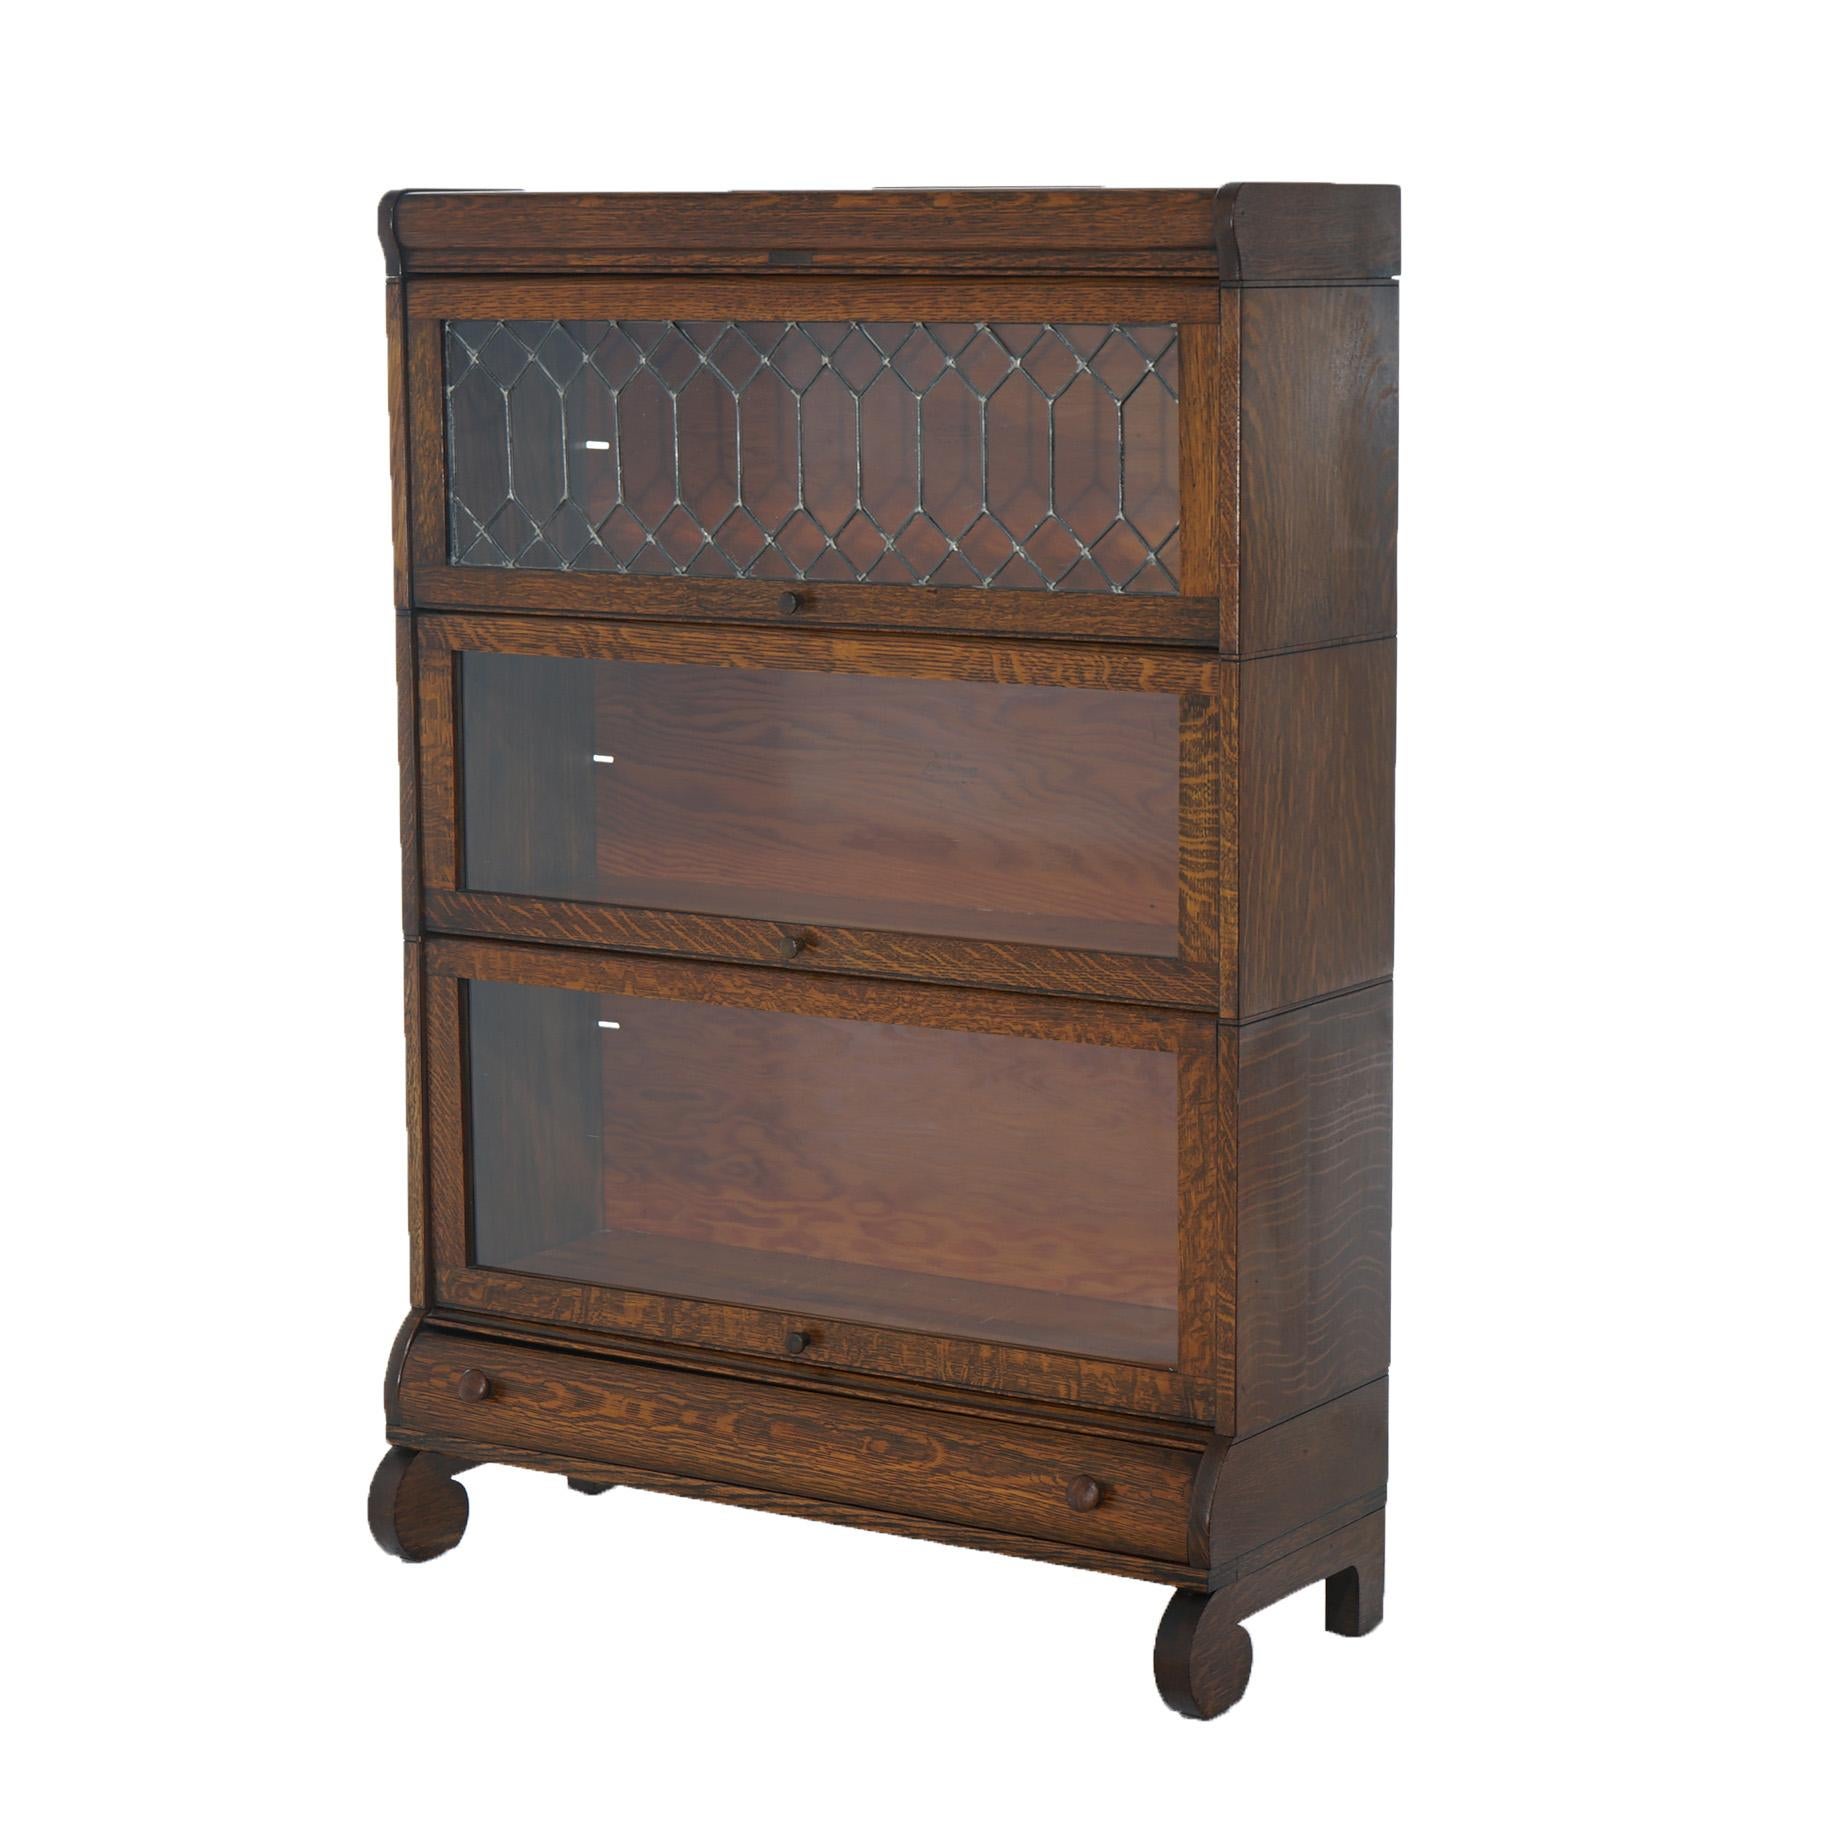 An antique Arts and Crafts Mission Lundstrom barrister bookcase offers quarter sawn oak construction with three stacks having pullout glass doors, one with leaded glass, lower drawer and raised on scroll form feet, c1910

Measures- 49''H x 33.75''W